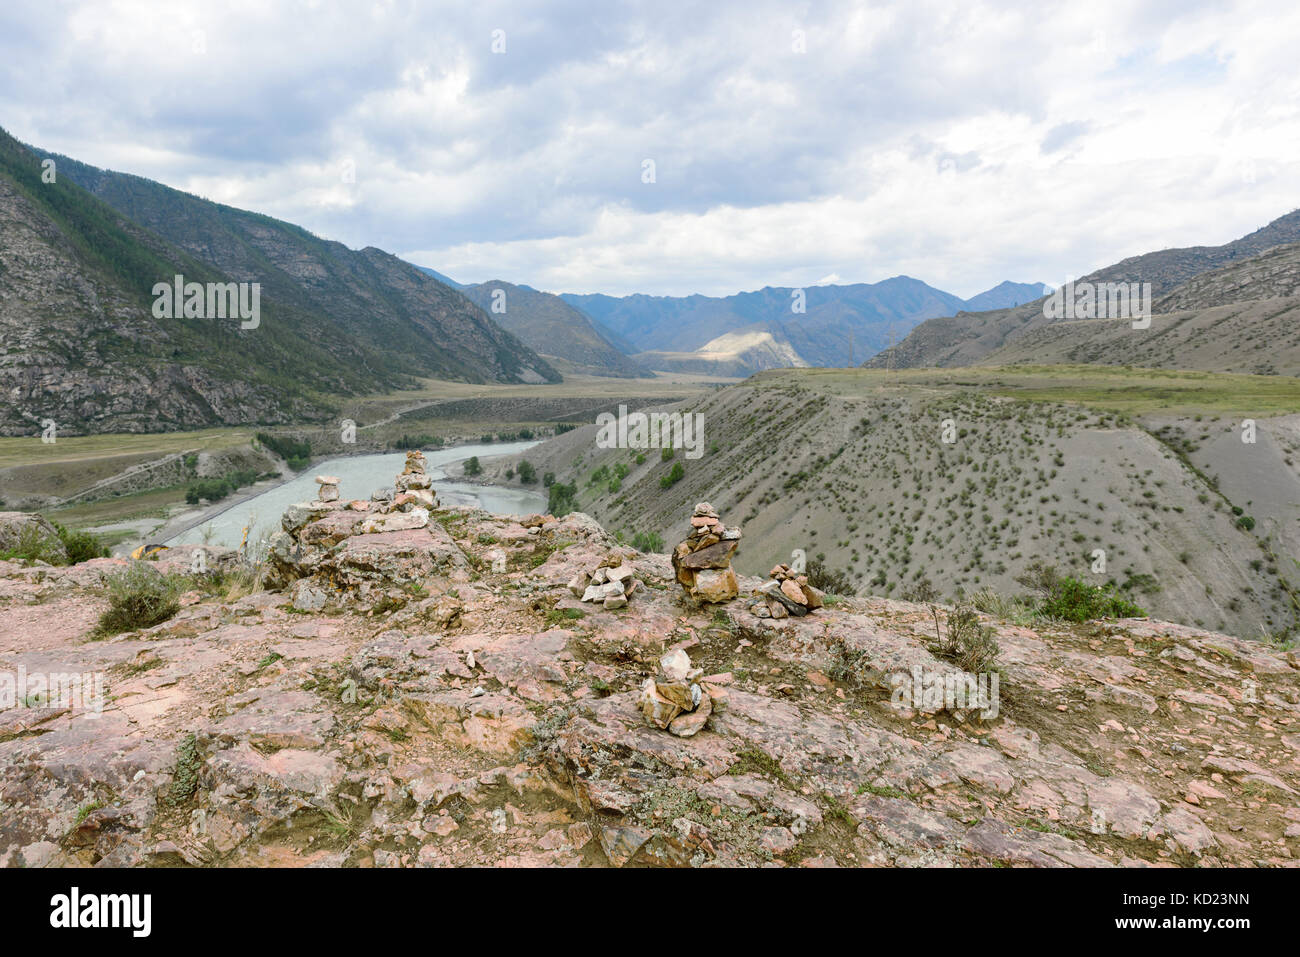 the valley of the Chuya River Stock Photo